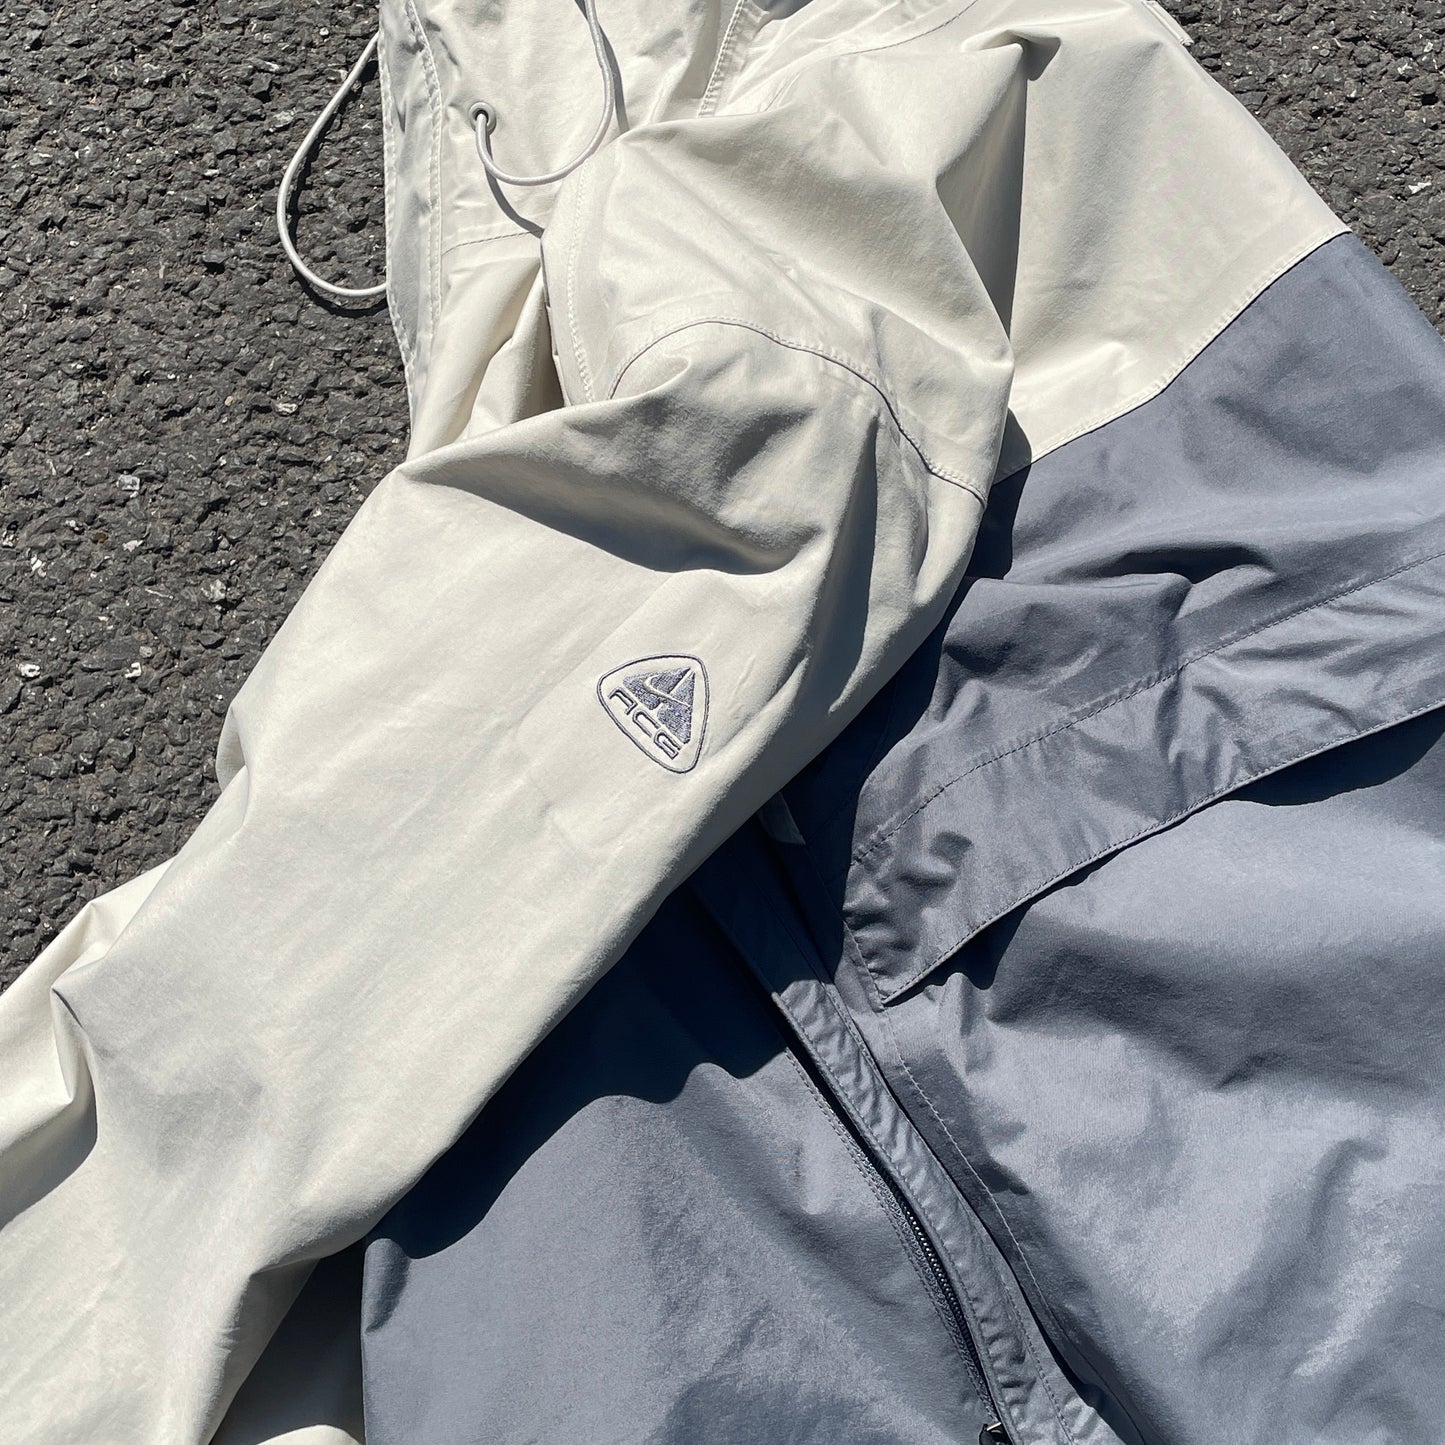 Nike ACG outer-layer storm-fit jacket